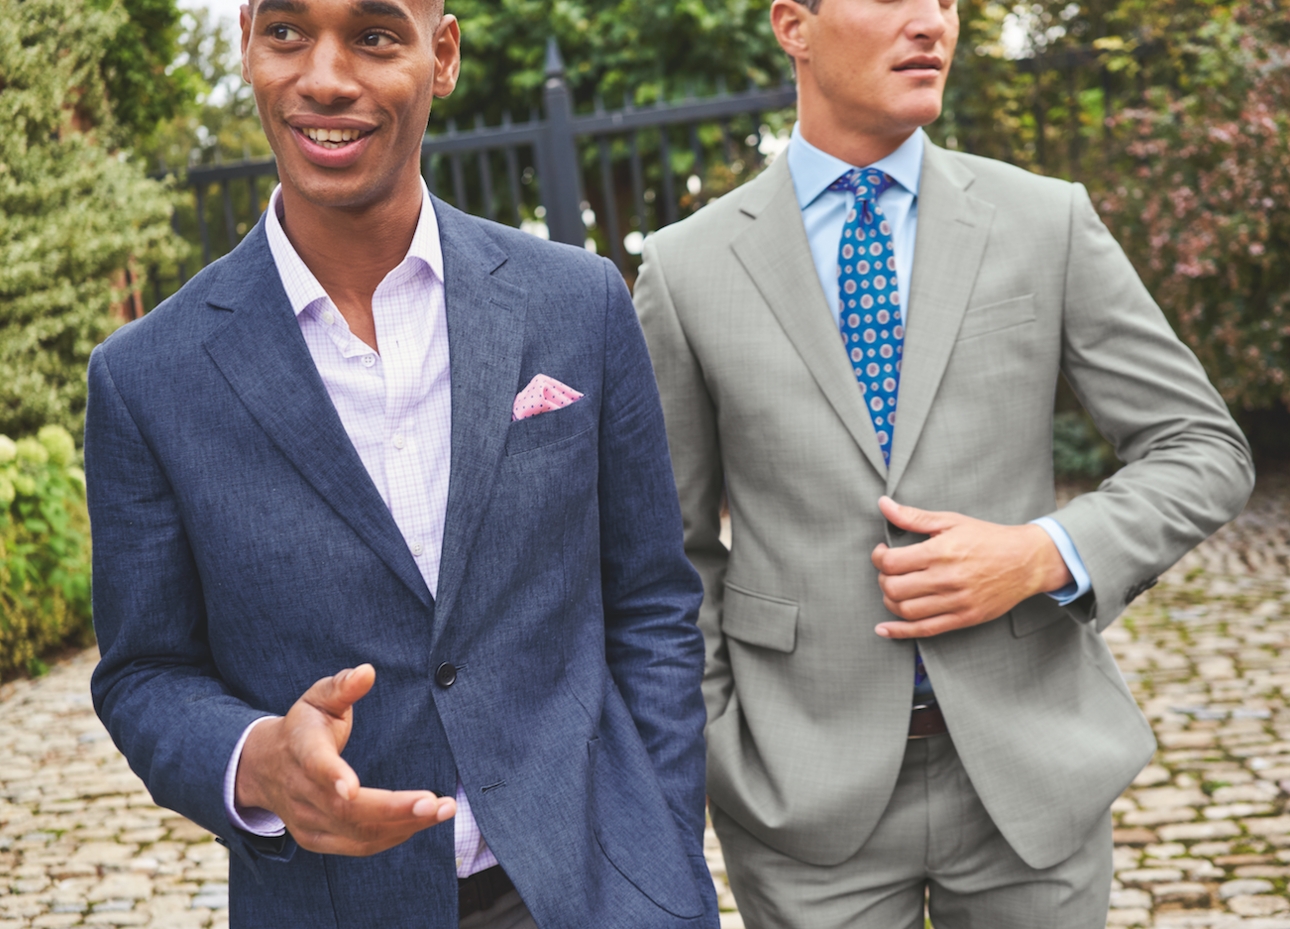 two male models in suites one grey with tie and one blue no tie